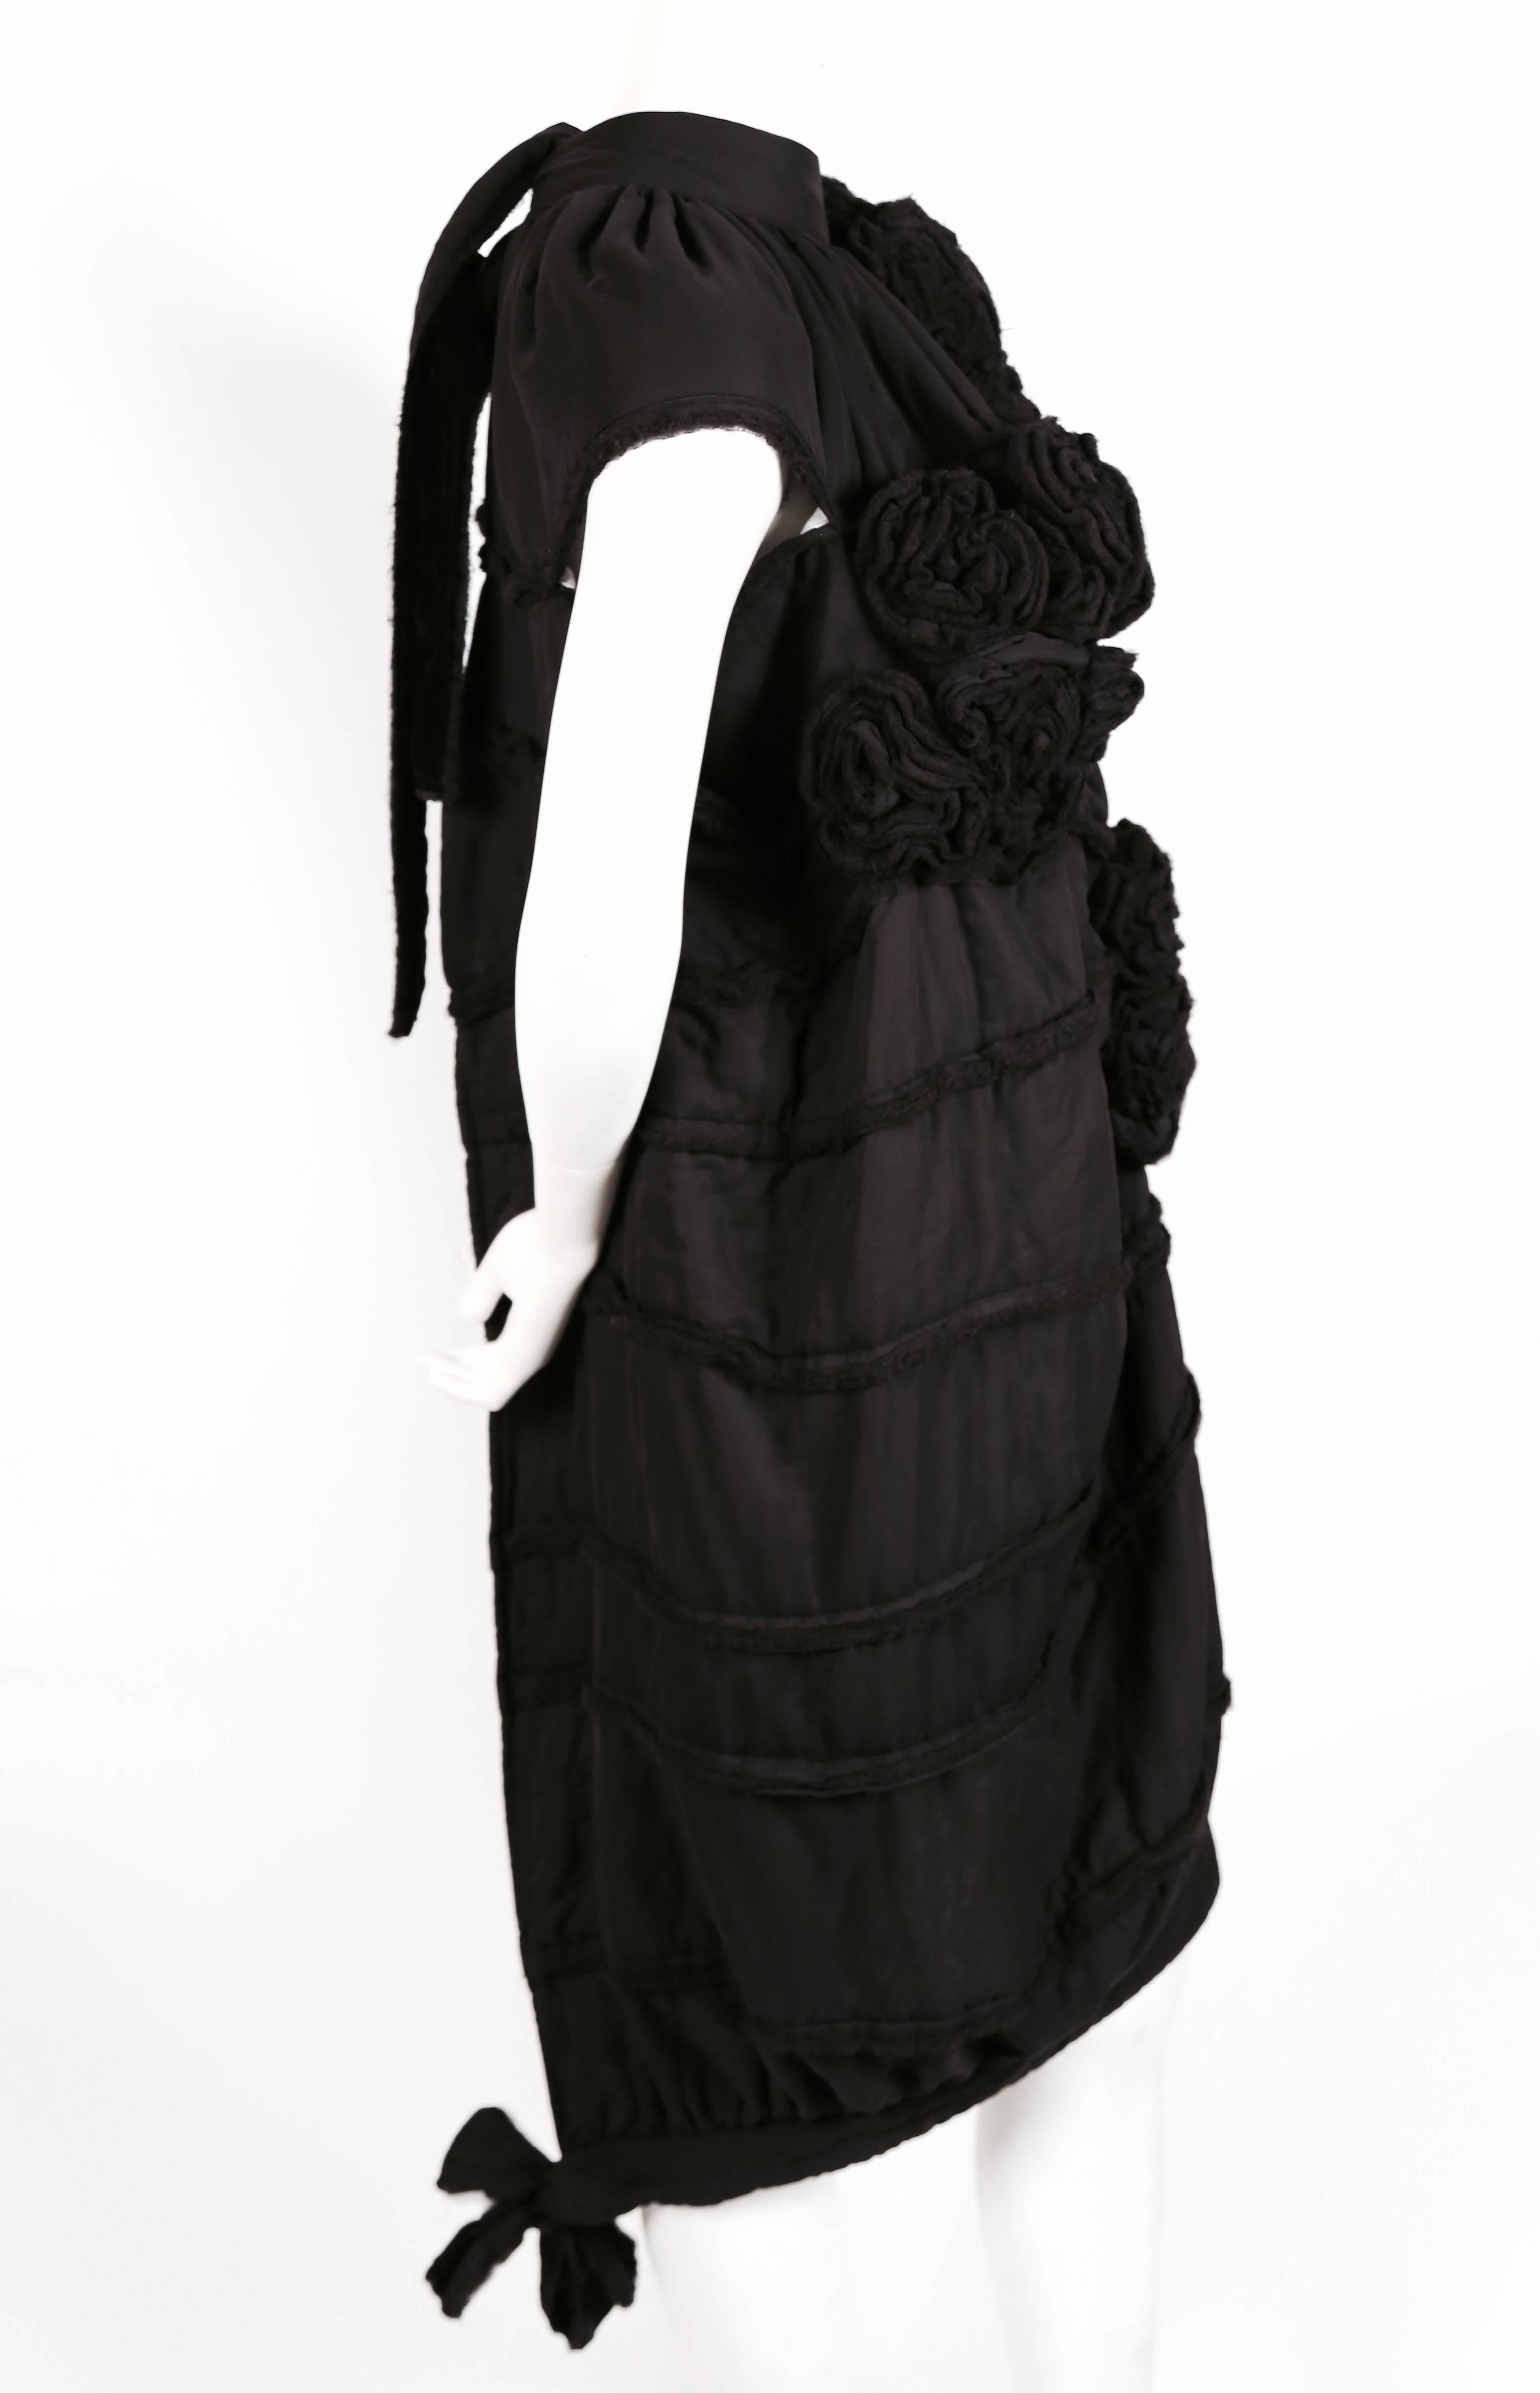 Very unusual, black, lightly padded dress with rosettes and unfinished edges designed by Tao Kurihara for Comme Des Garcons dating to fall of 2006. Size 'S'.  Measures approximately 37" at shortest point and 47" at longest point. Secures